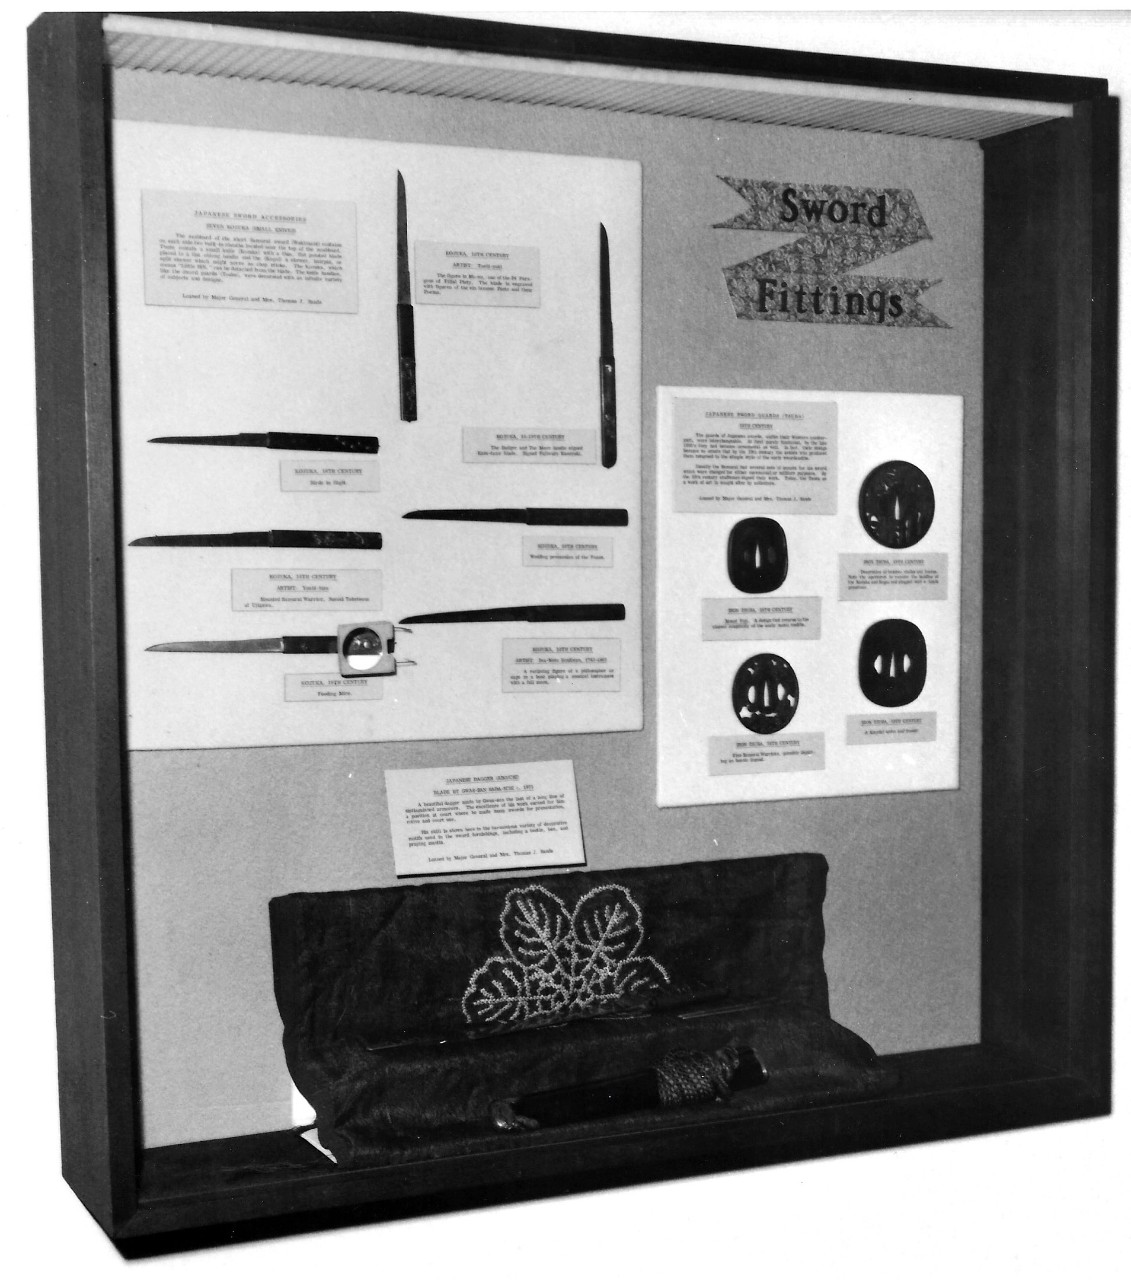 Samurai Swords Exhibit.   The Navy Memorial Museum (now National Museum of the Navy).  Shown:  Sword and Fittings exhibit case.   Exhibit was held from November 1977 to January 1978 and displayed thirty-seven swords from the collection of David E. J. Pepin.   National Museum of the U.S. Navy Photograph, NMUSN-Photo-11